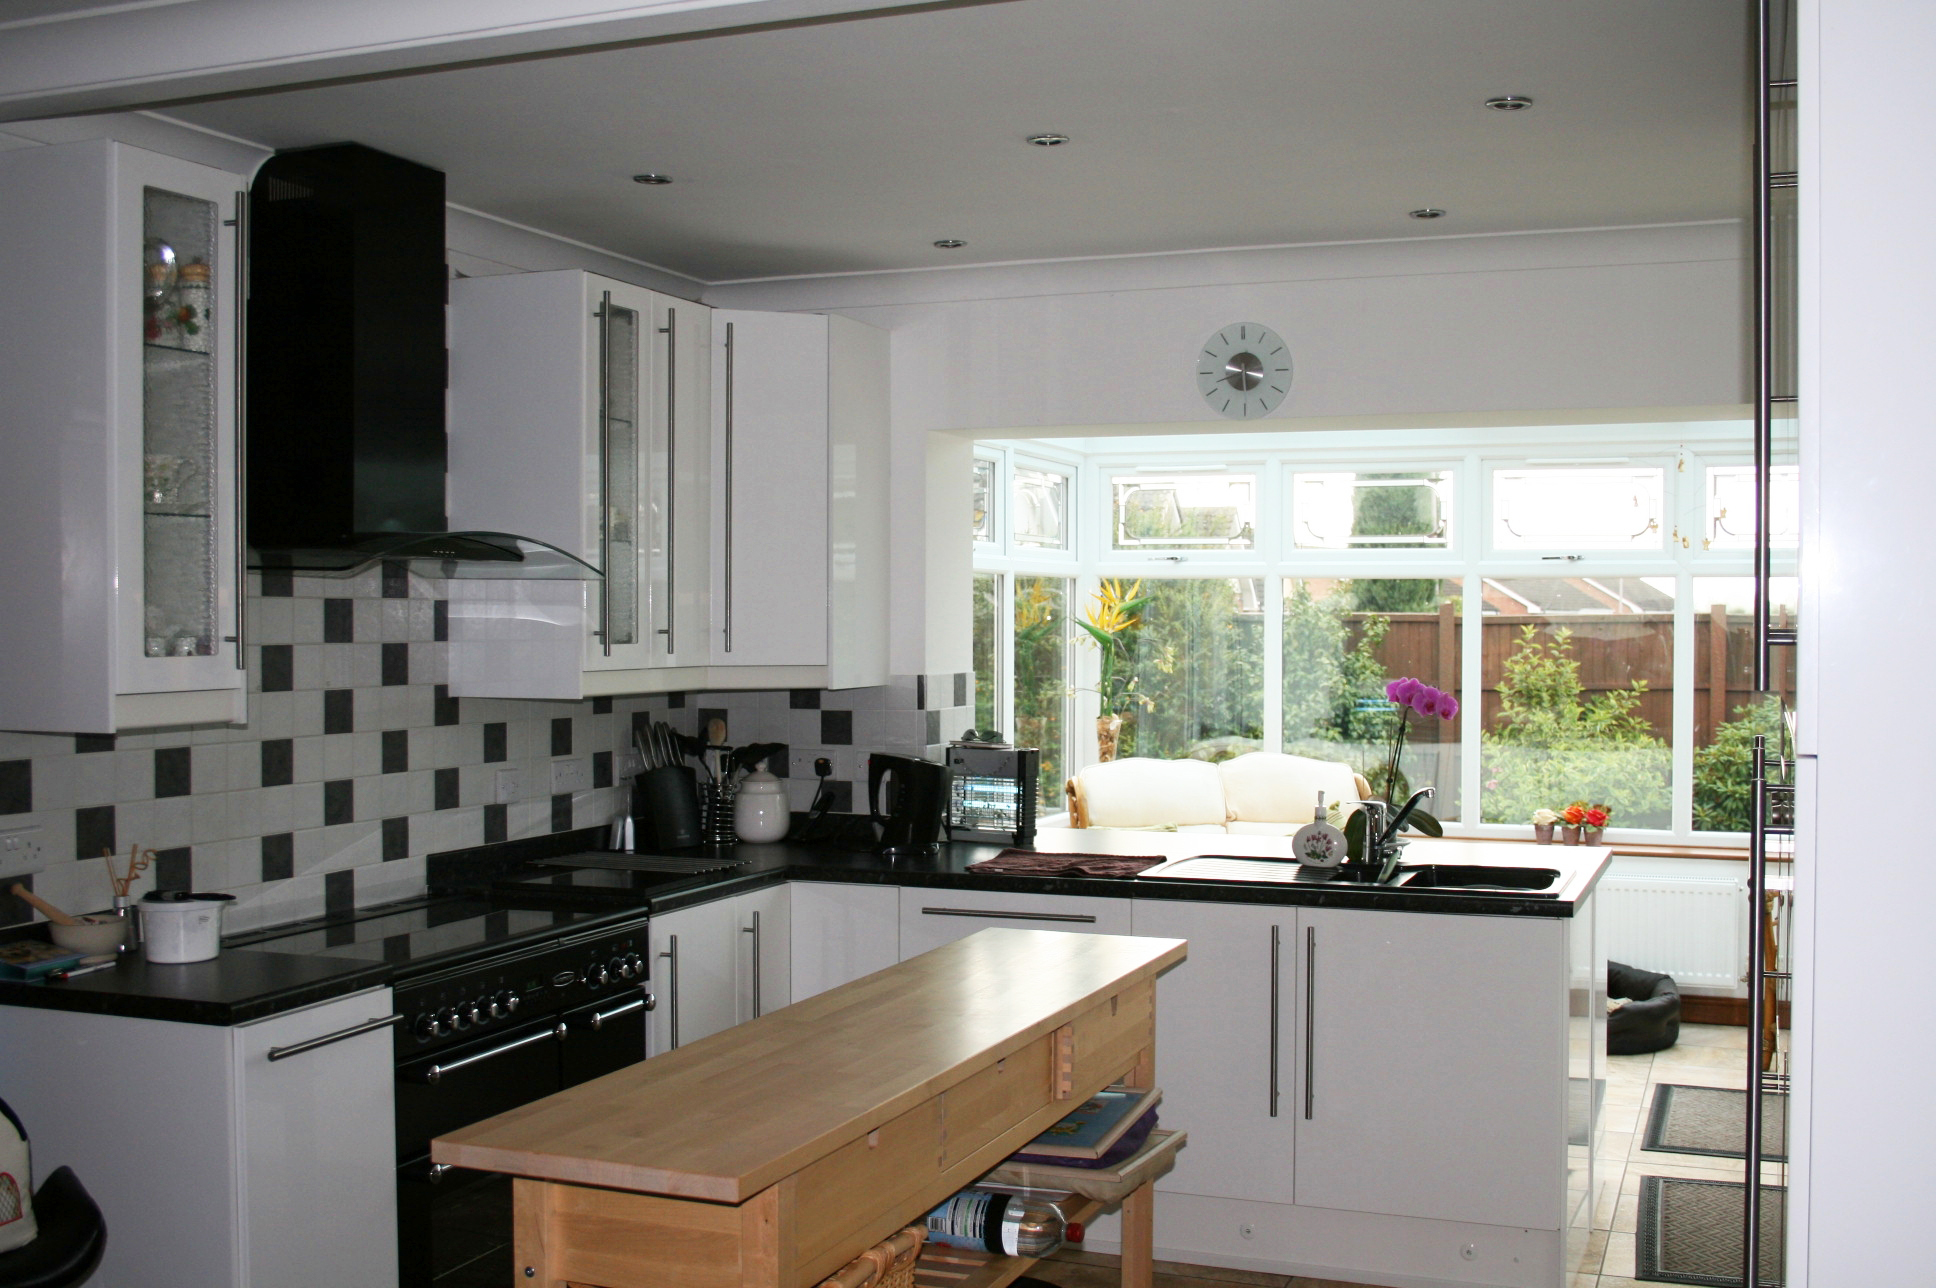 Cream gloss kitchen with integrated handles and blackstone worktops.